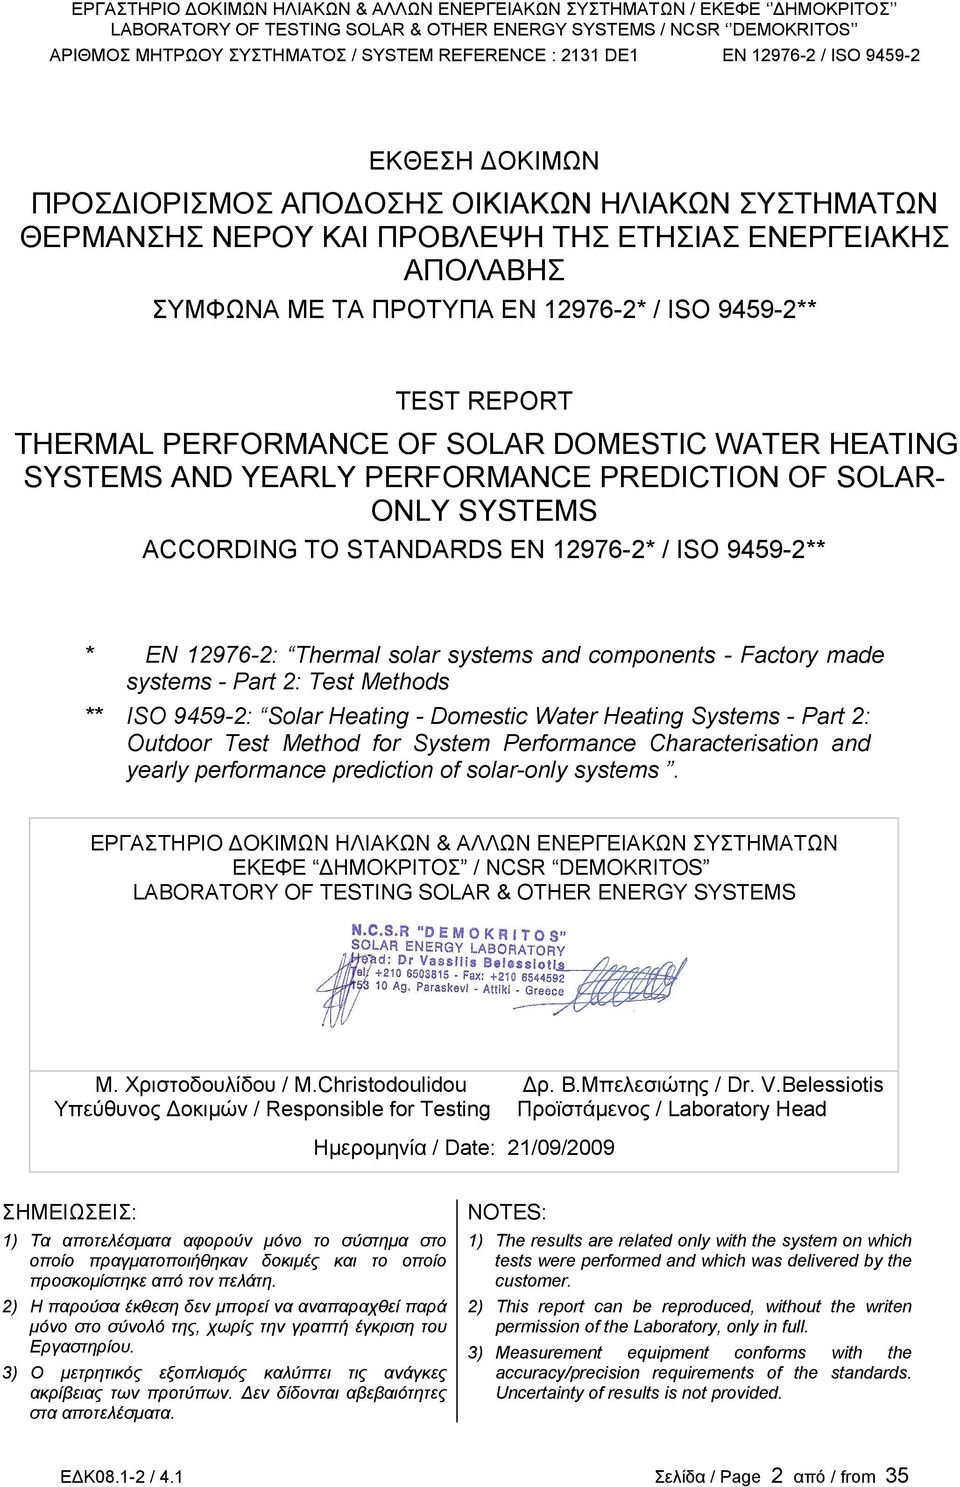 components - Factory made systems - Part 2: Test Methods ** ISO 9459-2: Solar Heating - Domestic Water Heating Systems - Part 2: Outdoor Test Method for System Performance Characterisation and yearly